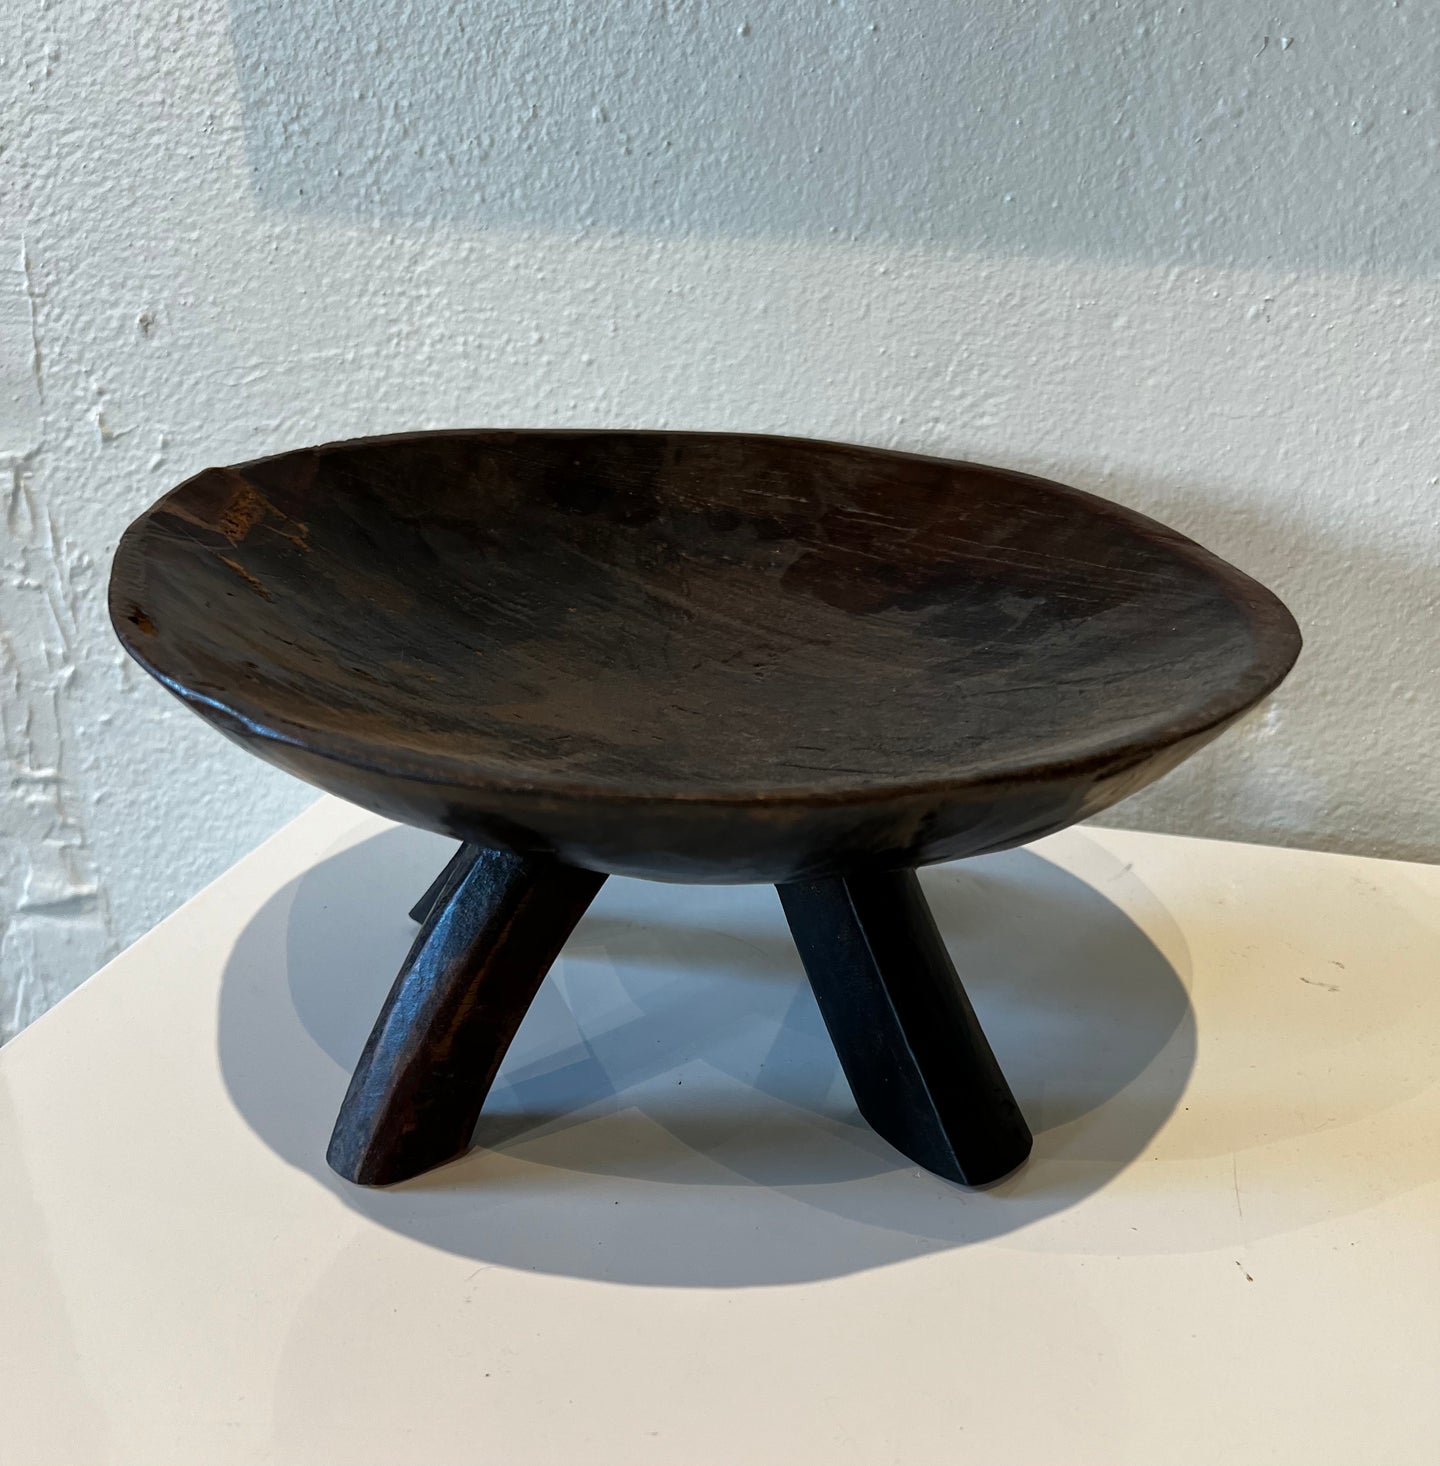 Wood Bowl with Feet